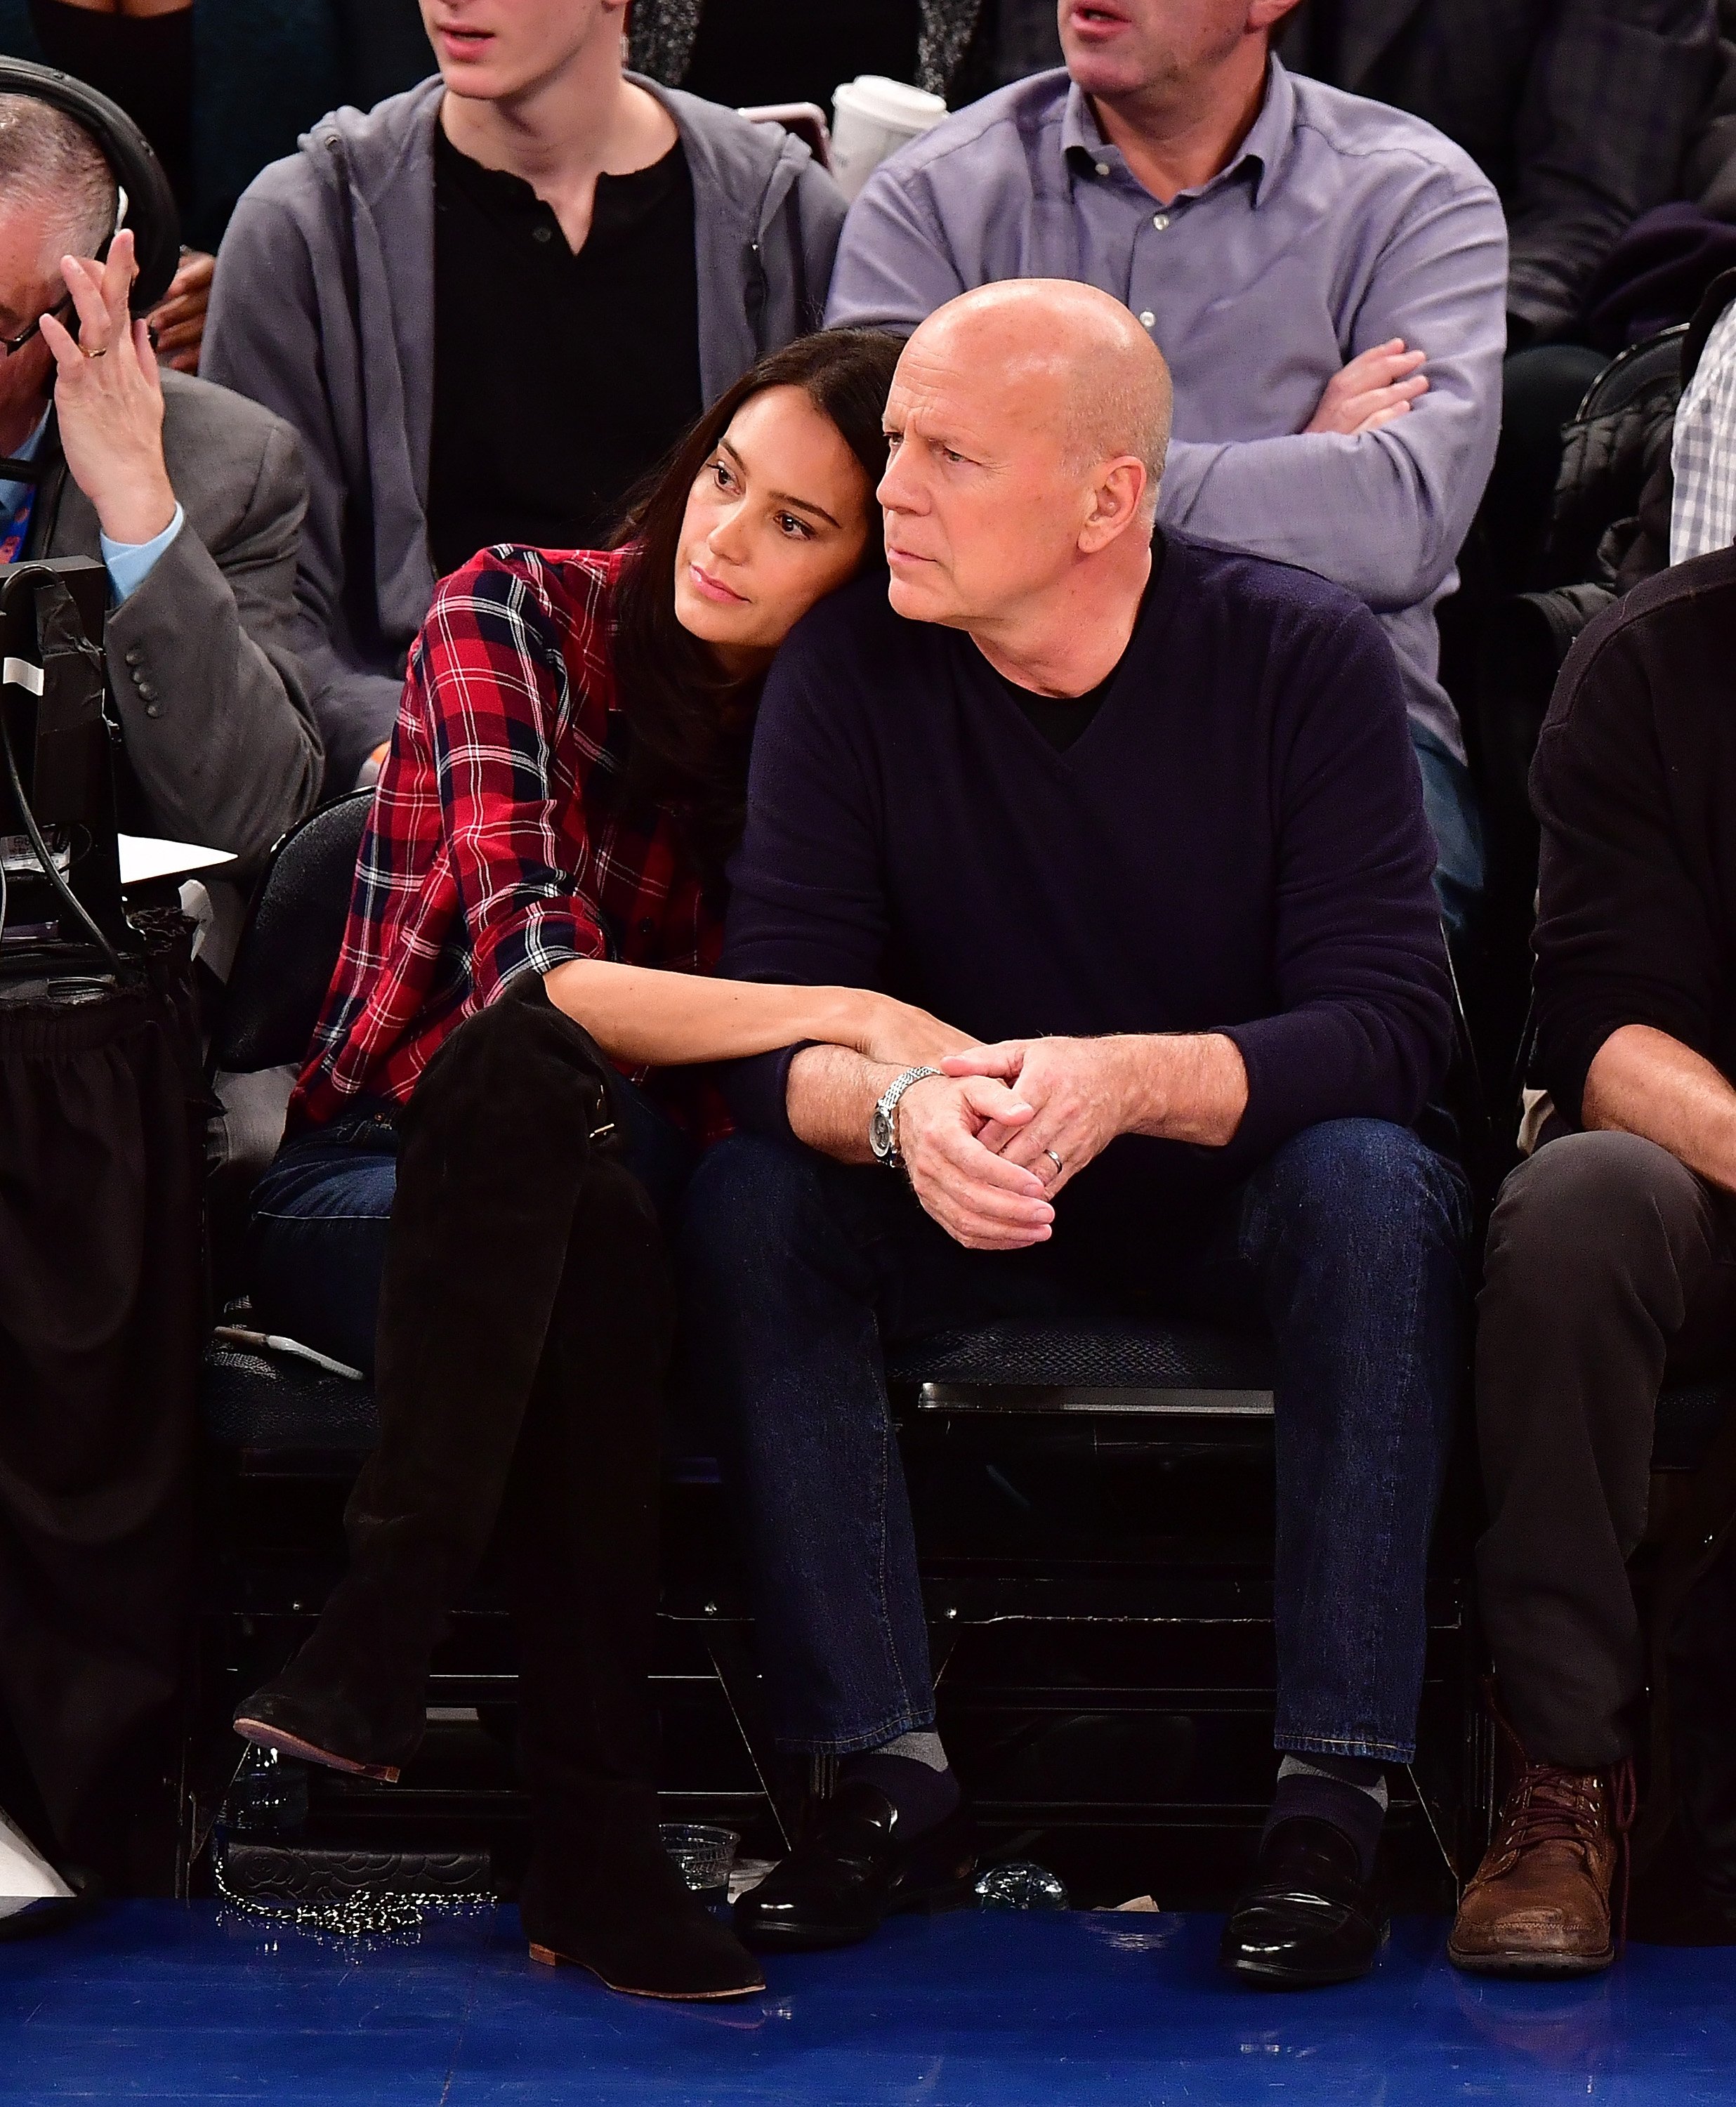 Actress Emma Heming Willis and Bruce Willis during Cleveland Cavaliers Vs. New York Knicks game at Madison Square Garden on February 4, 2017 in New York City. / Source: Getty Images